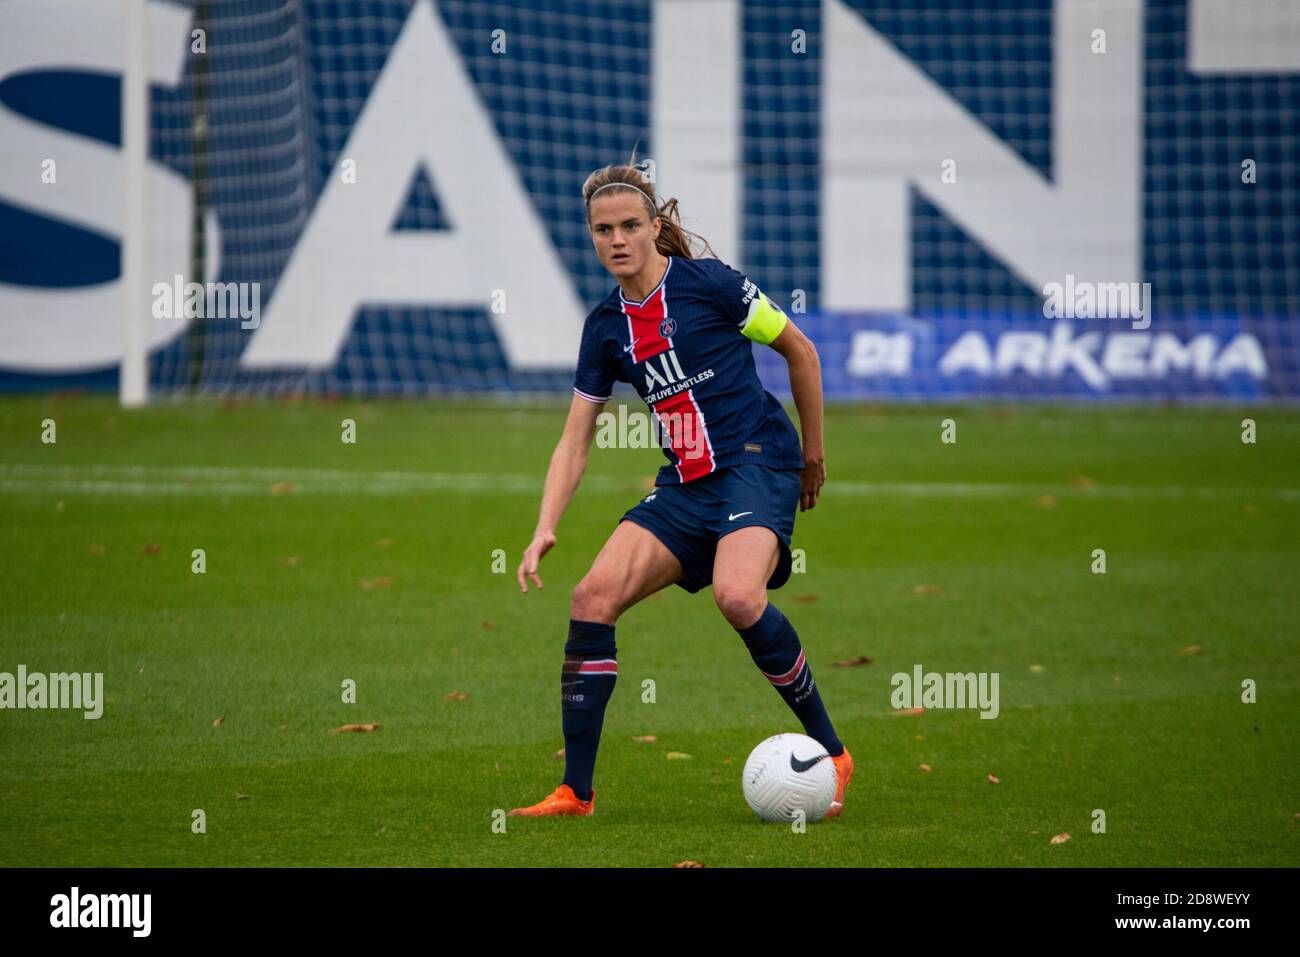 Irene Paredes of Paris Saint Germain controls the ball during the Women's French championship D1 Arkema football match between Paris Saint-Germain and FC Fleury 91 on November 1, 2020 at Georges Lef.vre stadium in Saint-Germain-en-Laye, France - Photo Antoine Massinon / A2M Sport Consulting / DPPI Credit: LM/DPPI/Antoine Massinon/Alamy Live News Stock Photo